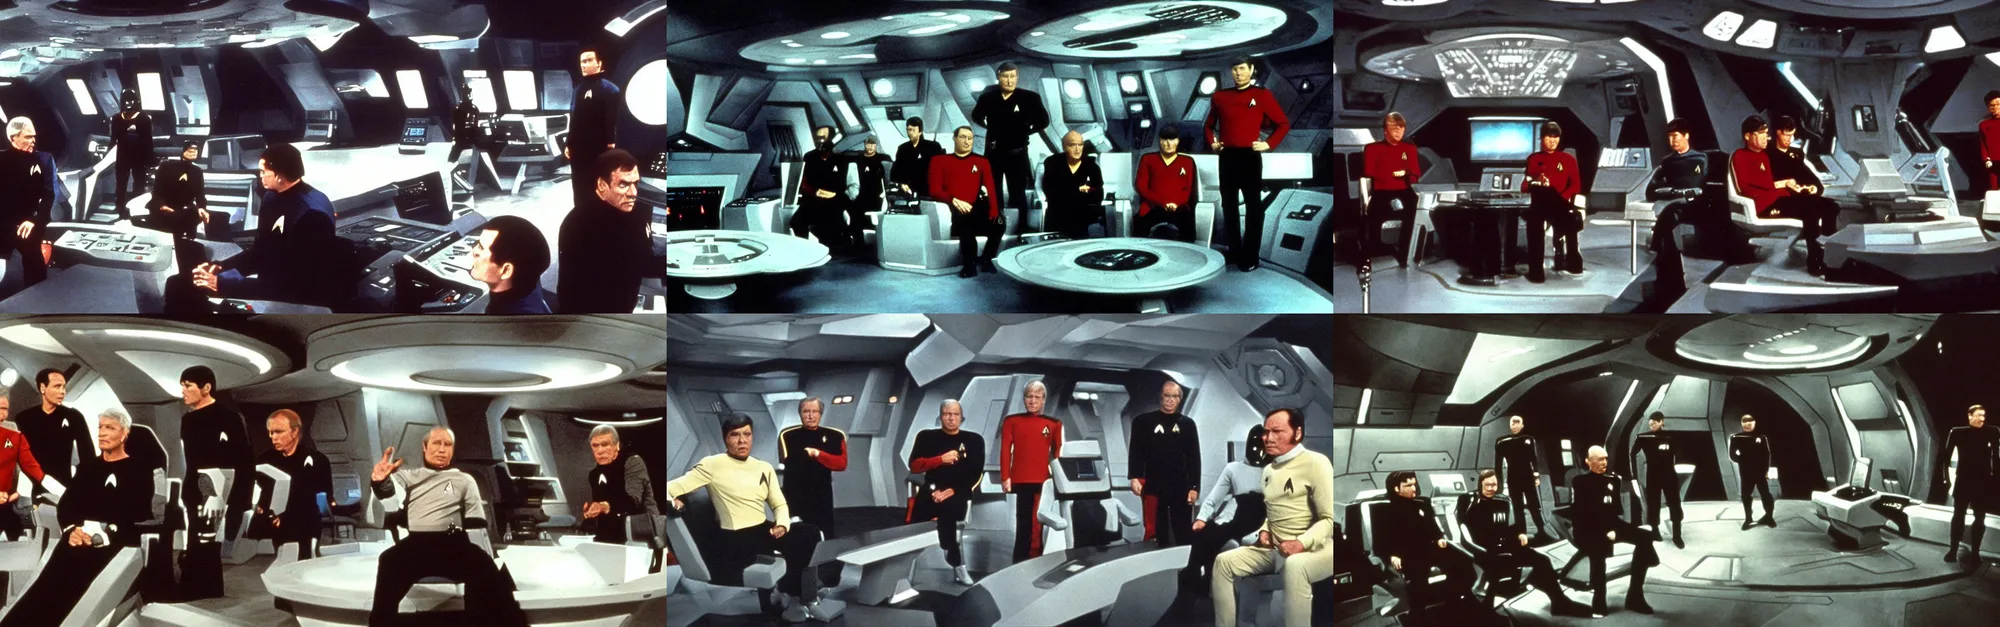 Prompt: Scene from Star Trek The Next Generation showing the deck of the Starship Enterprise with Darth Vader as the Captain, sitting in the captain's chair. Probert, Rick Sternbach, Michael Okuda, John Eaves.